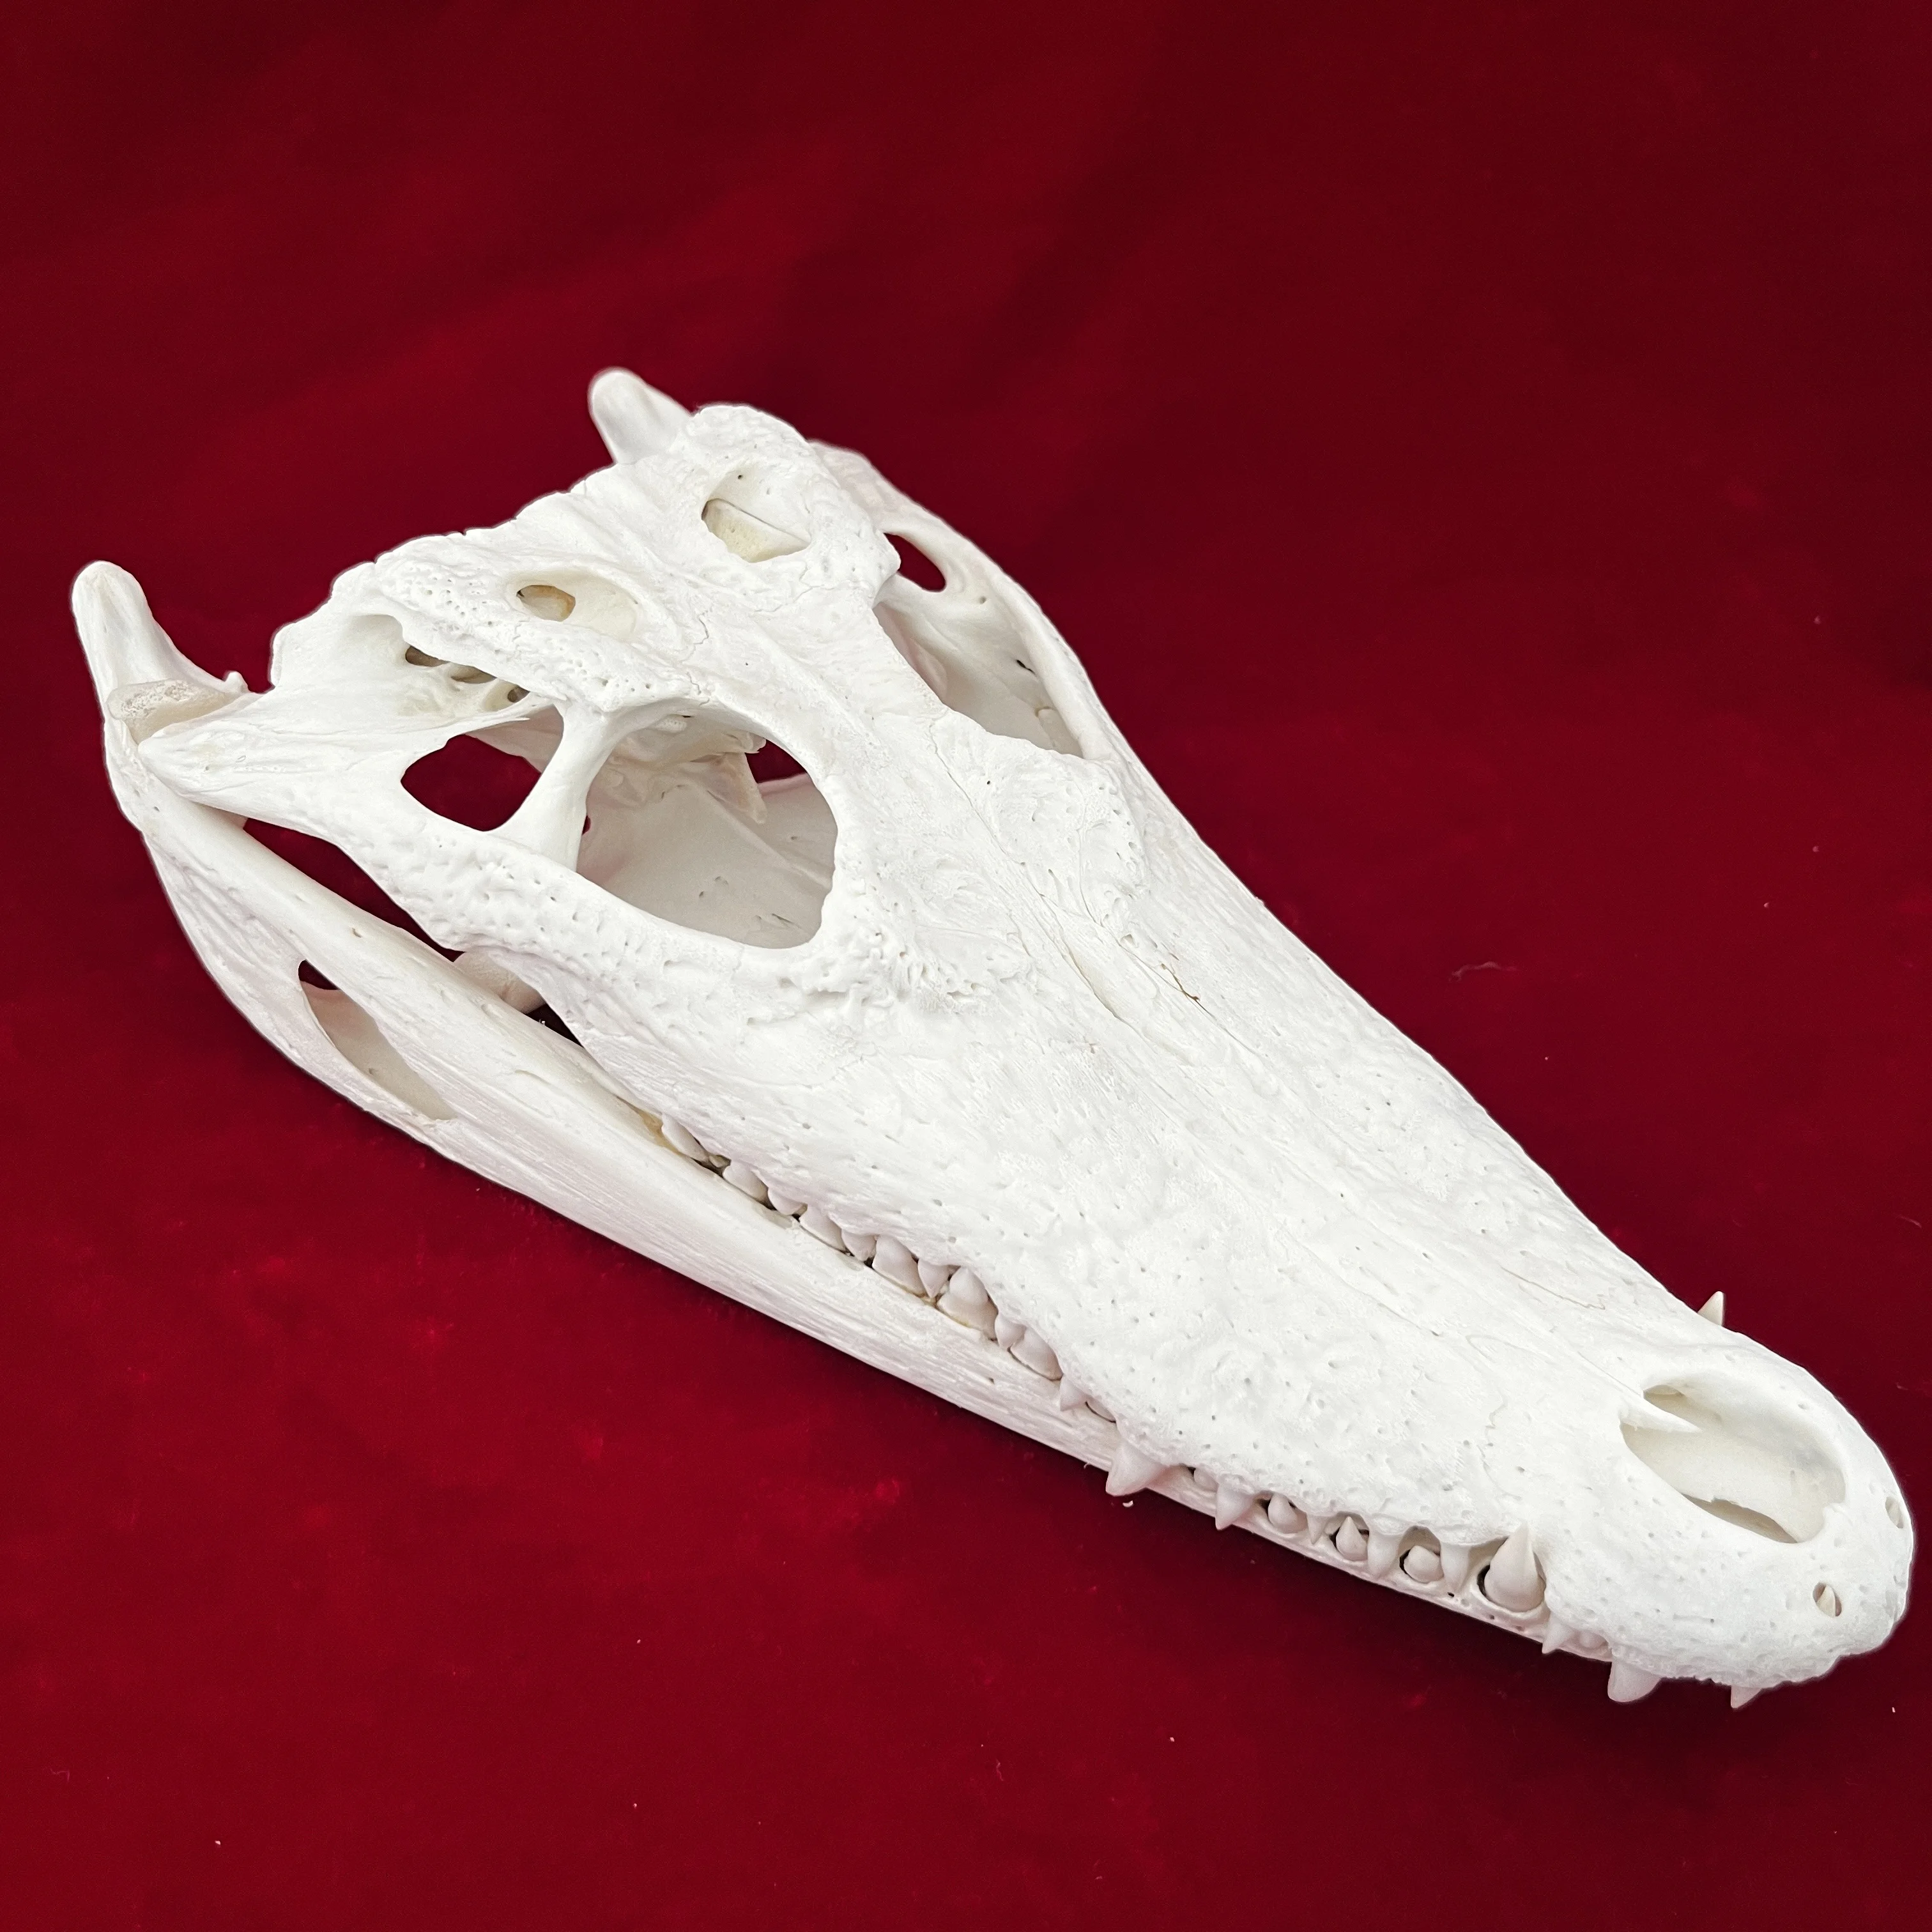 1pcs Animal Skull Collectibles specimen gift or decoration 